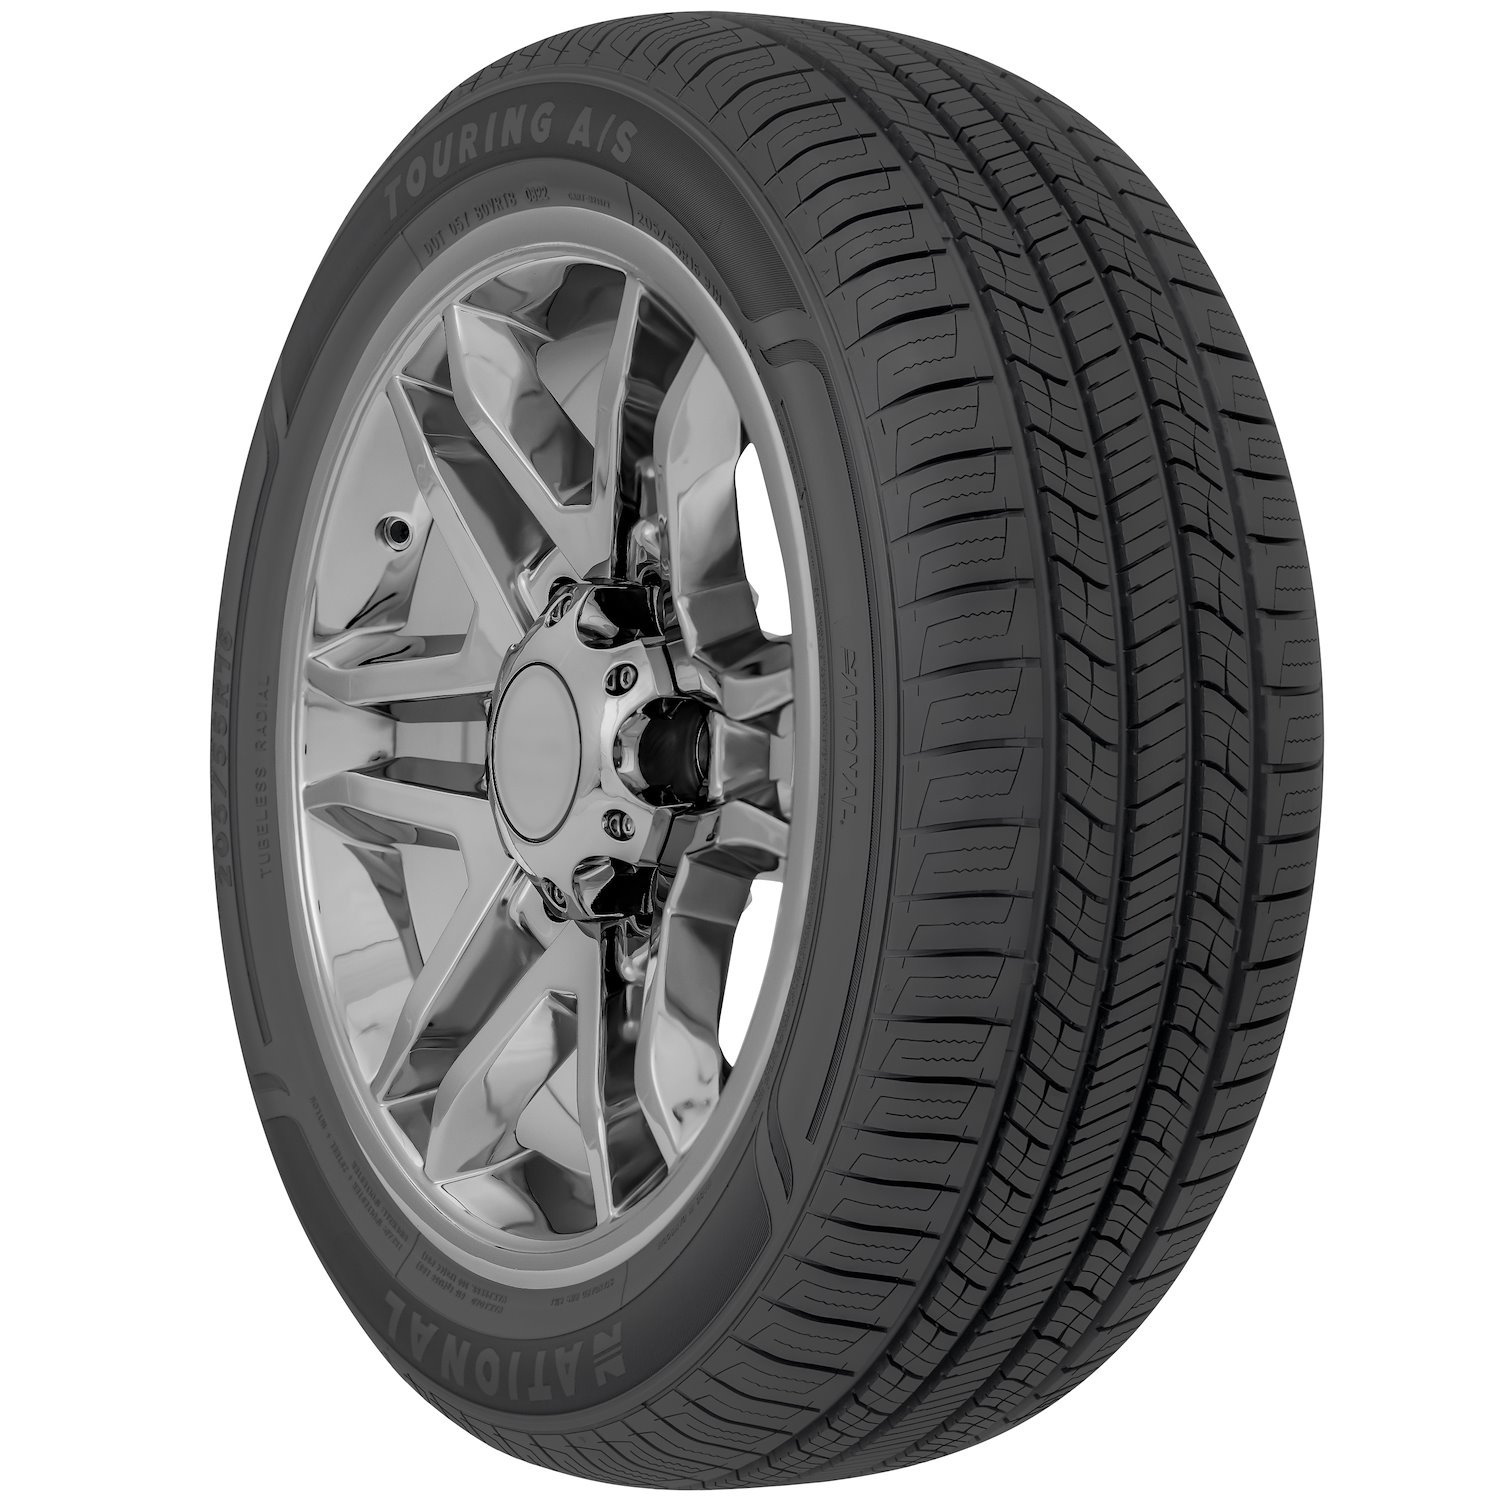 NLR52 Touring A/S Tire, 225/60R16